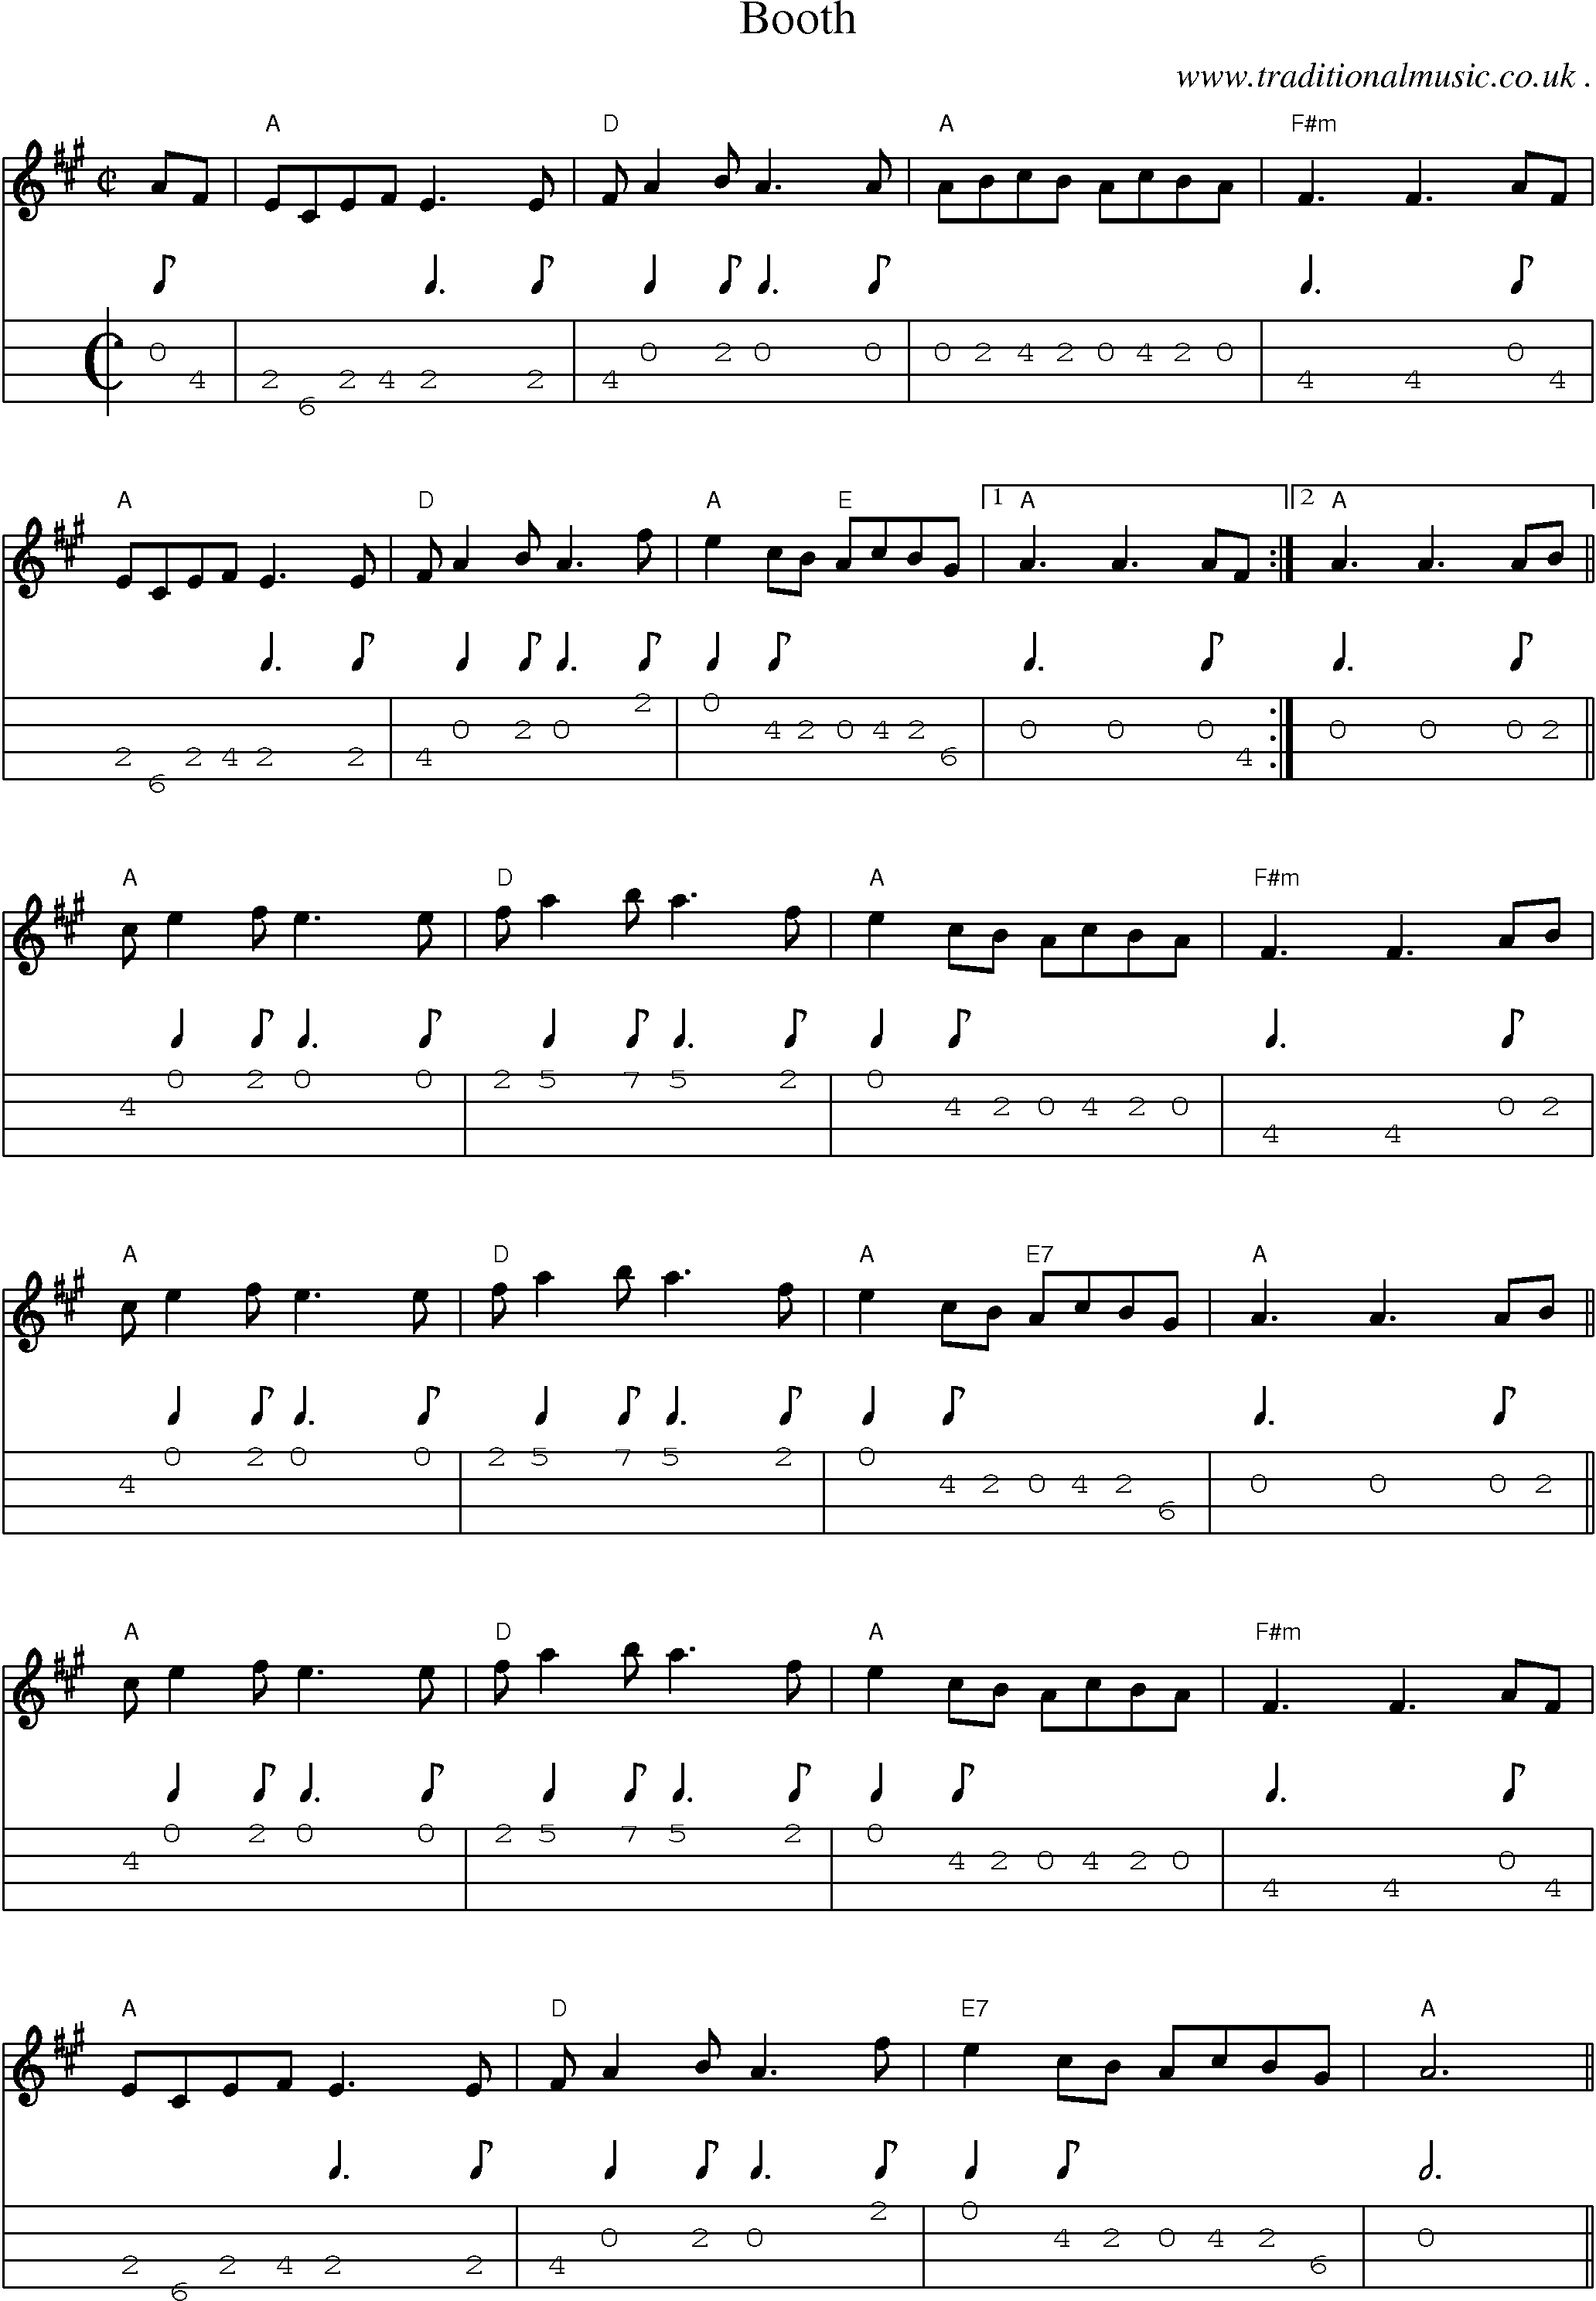 Music Score and Mandolin Tabs for Booth